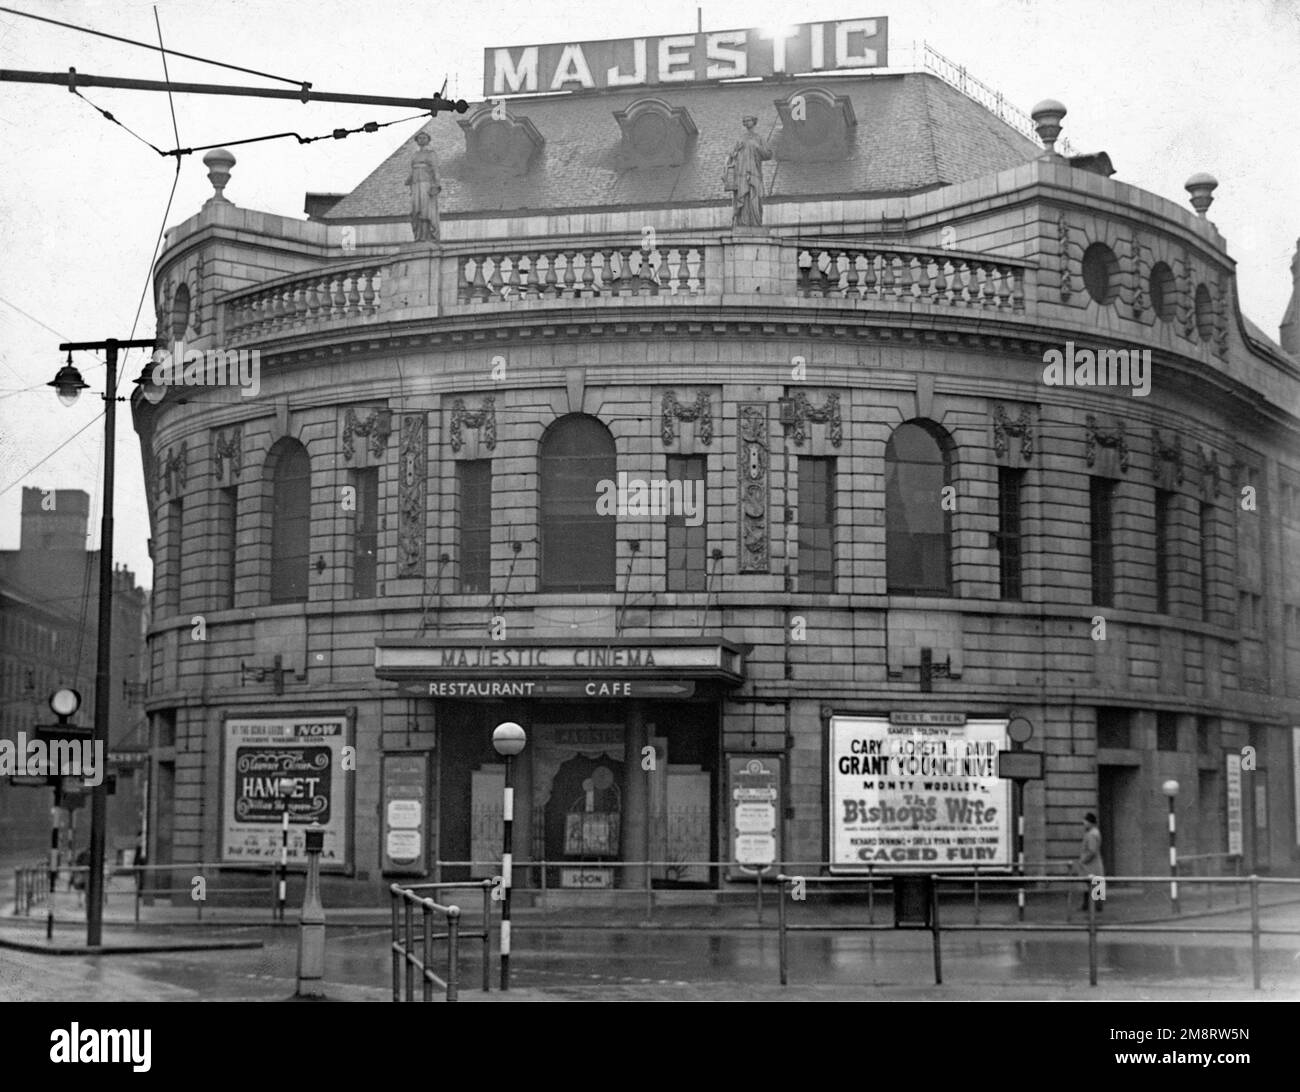 The Majestic Cinema in Leeds city centre at junction of Quebec Street and Wellington Street in late 1948 when it was showing LAURENCE OLIVIER and JEAN SIMMONS in HAMLET with next attraction being CARY GRANT LORETTA YOUNG and DAVID NIVEN in THE BISHOP'S WIFE Stock Photo